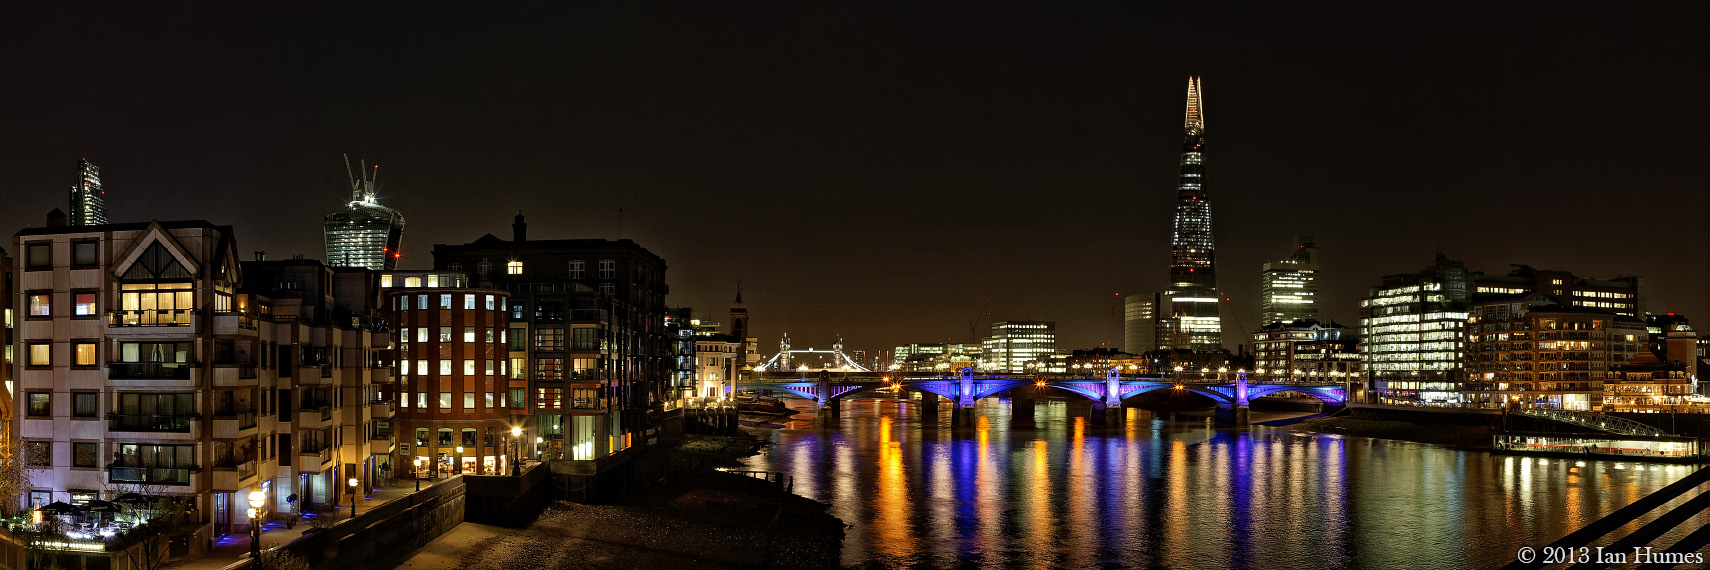 The Shard, Tower Bridge and the `Walkie Talkie` building photographed from the Millennium Bridge at night - London